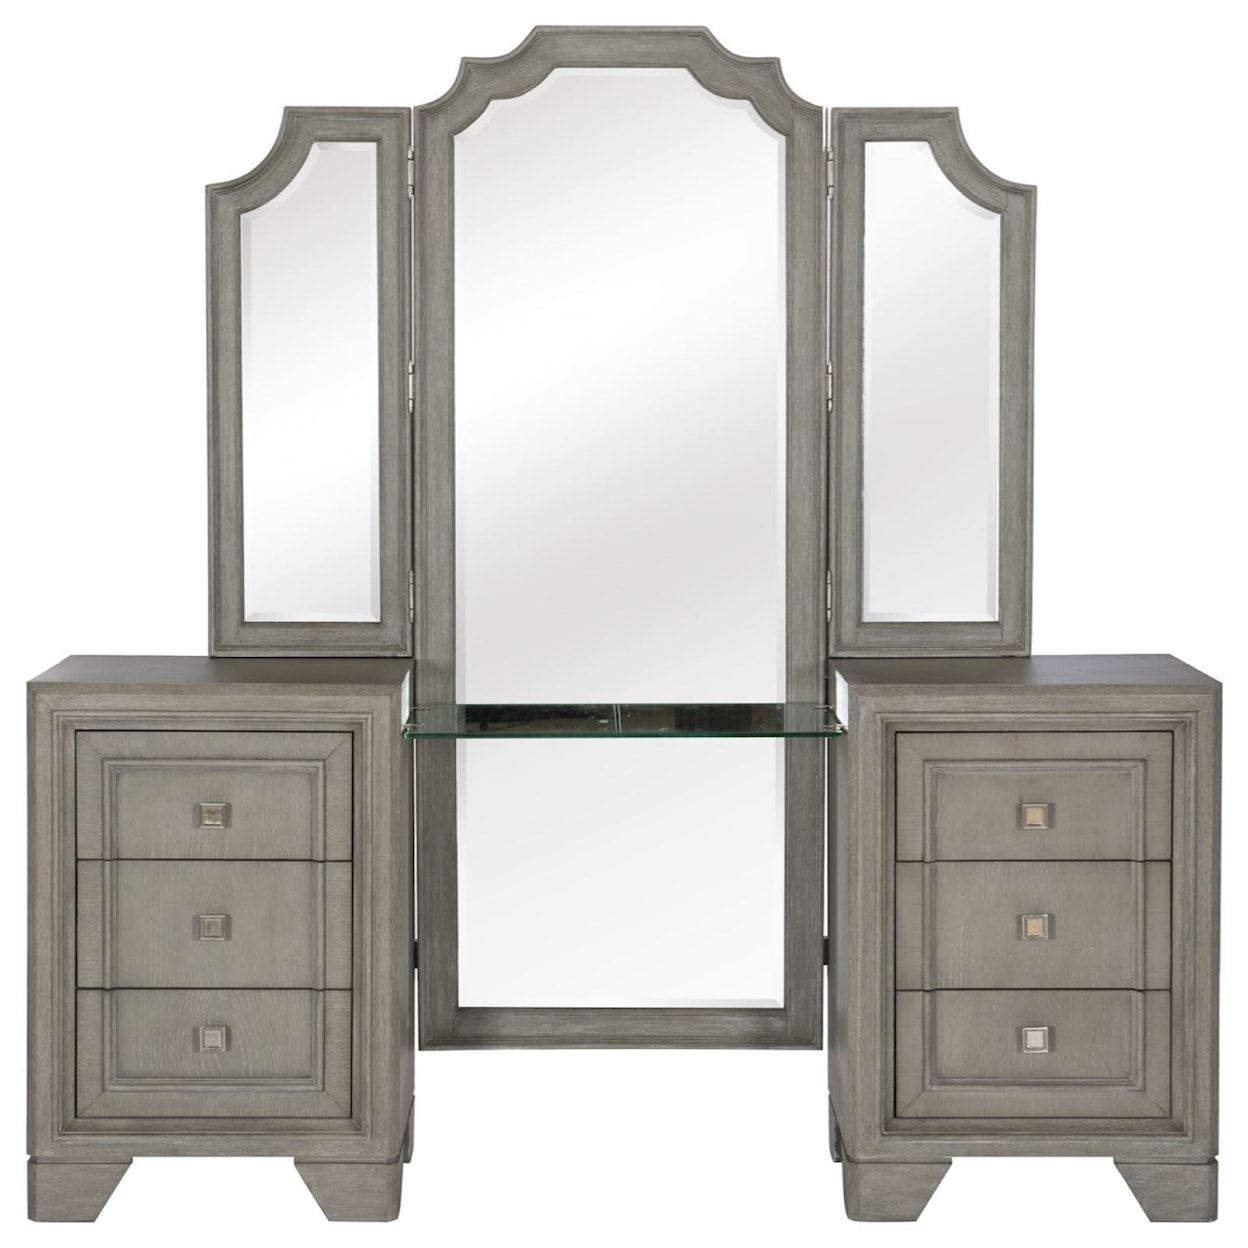 Homelegance Colchester Vanity Dress with Mirror